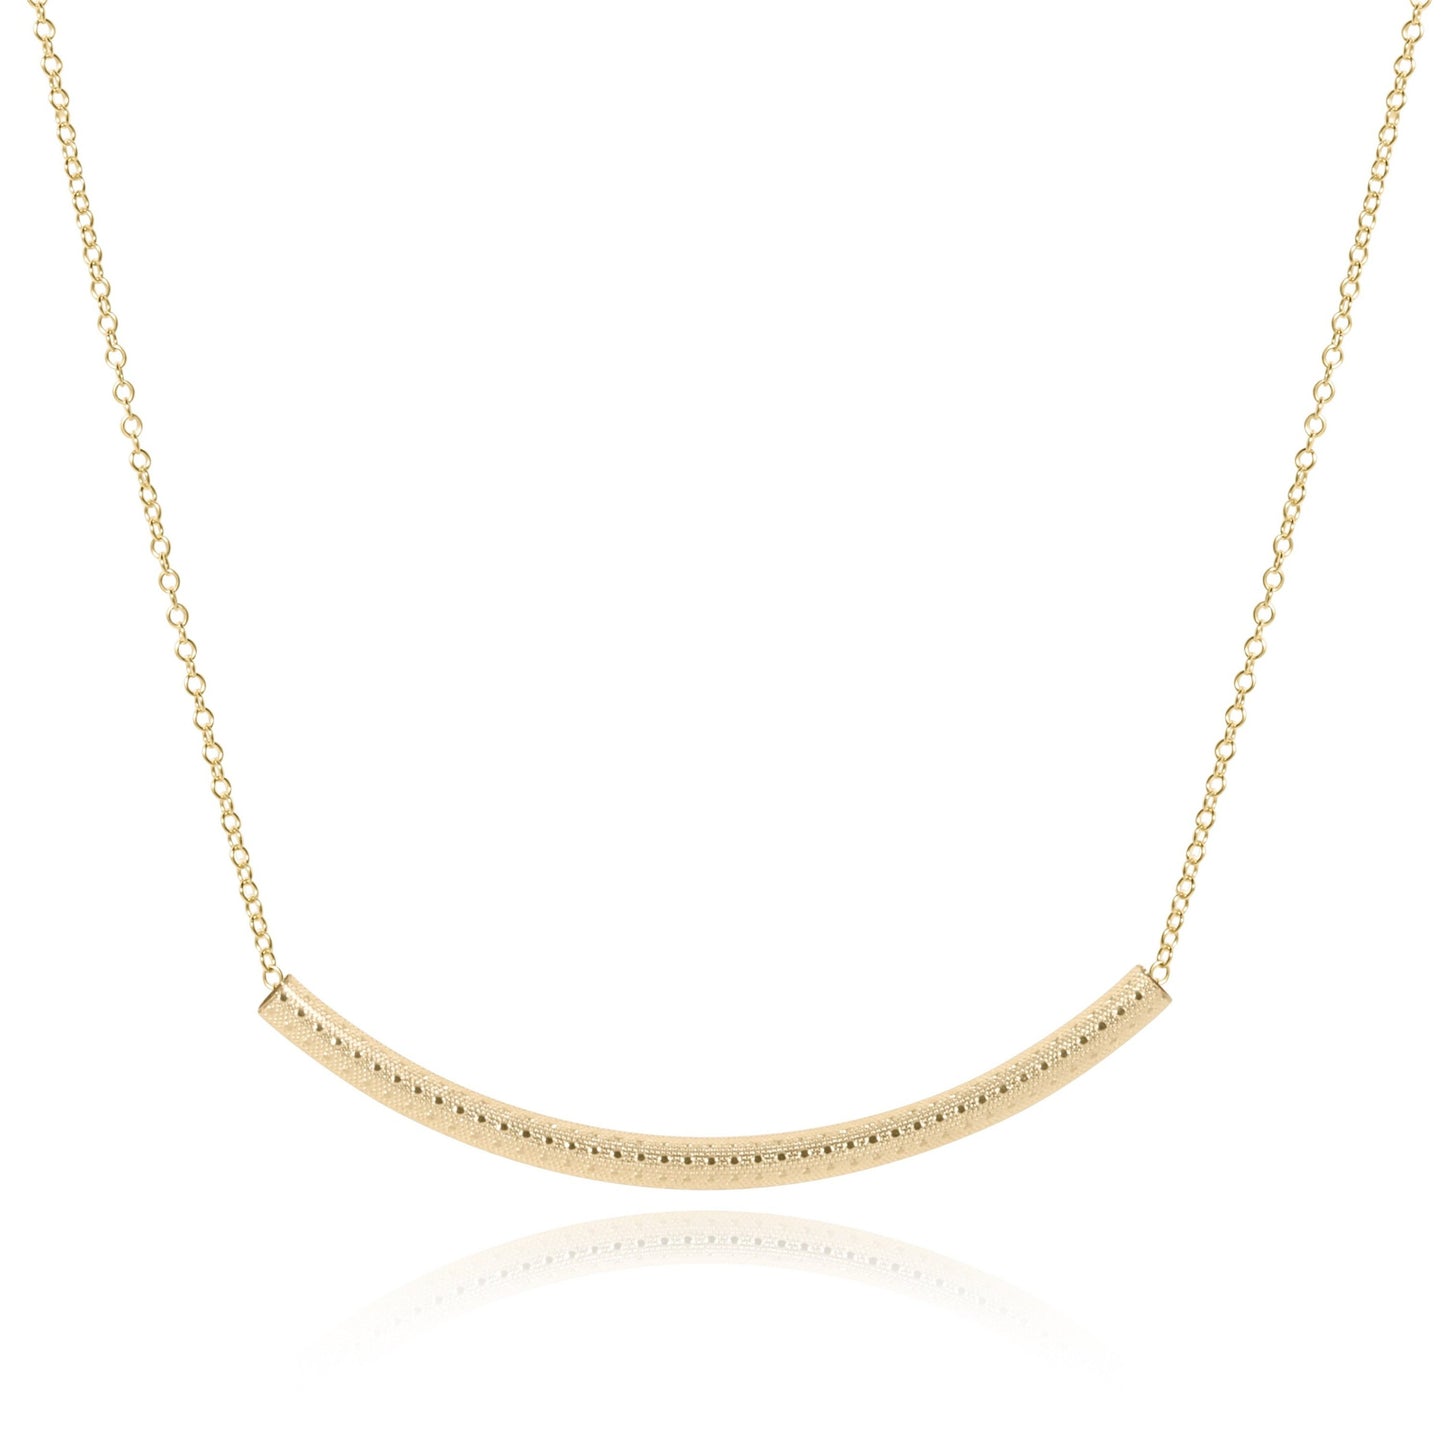 16" Necklace Gold - Bliss Bar Textured Gold